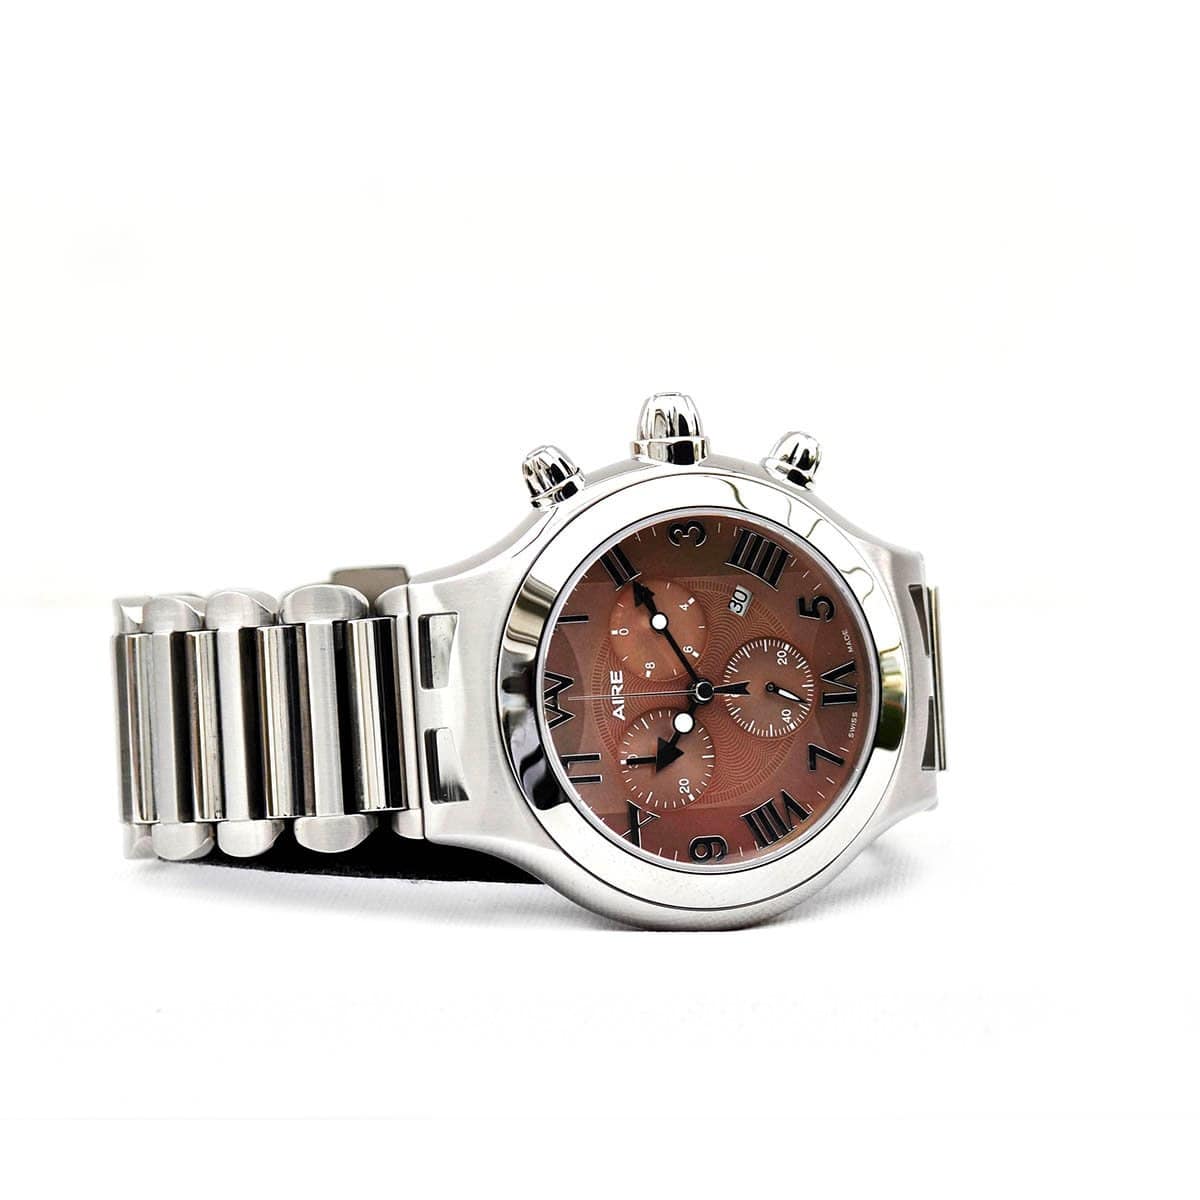 CHRIS AIRE WATCH, PARLAY CHRONOGRAPH - Chris Aire Fine Jewelry & Timepieces